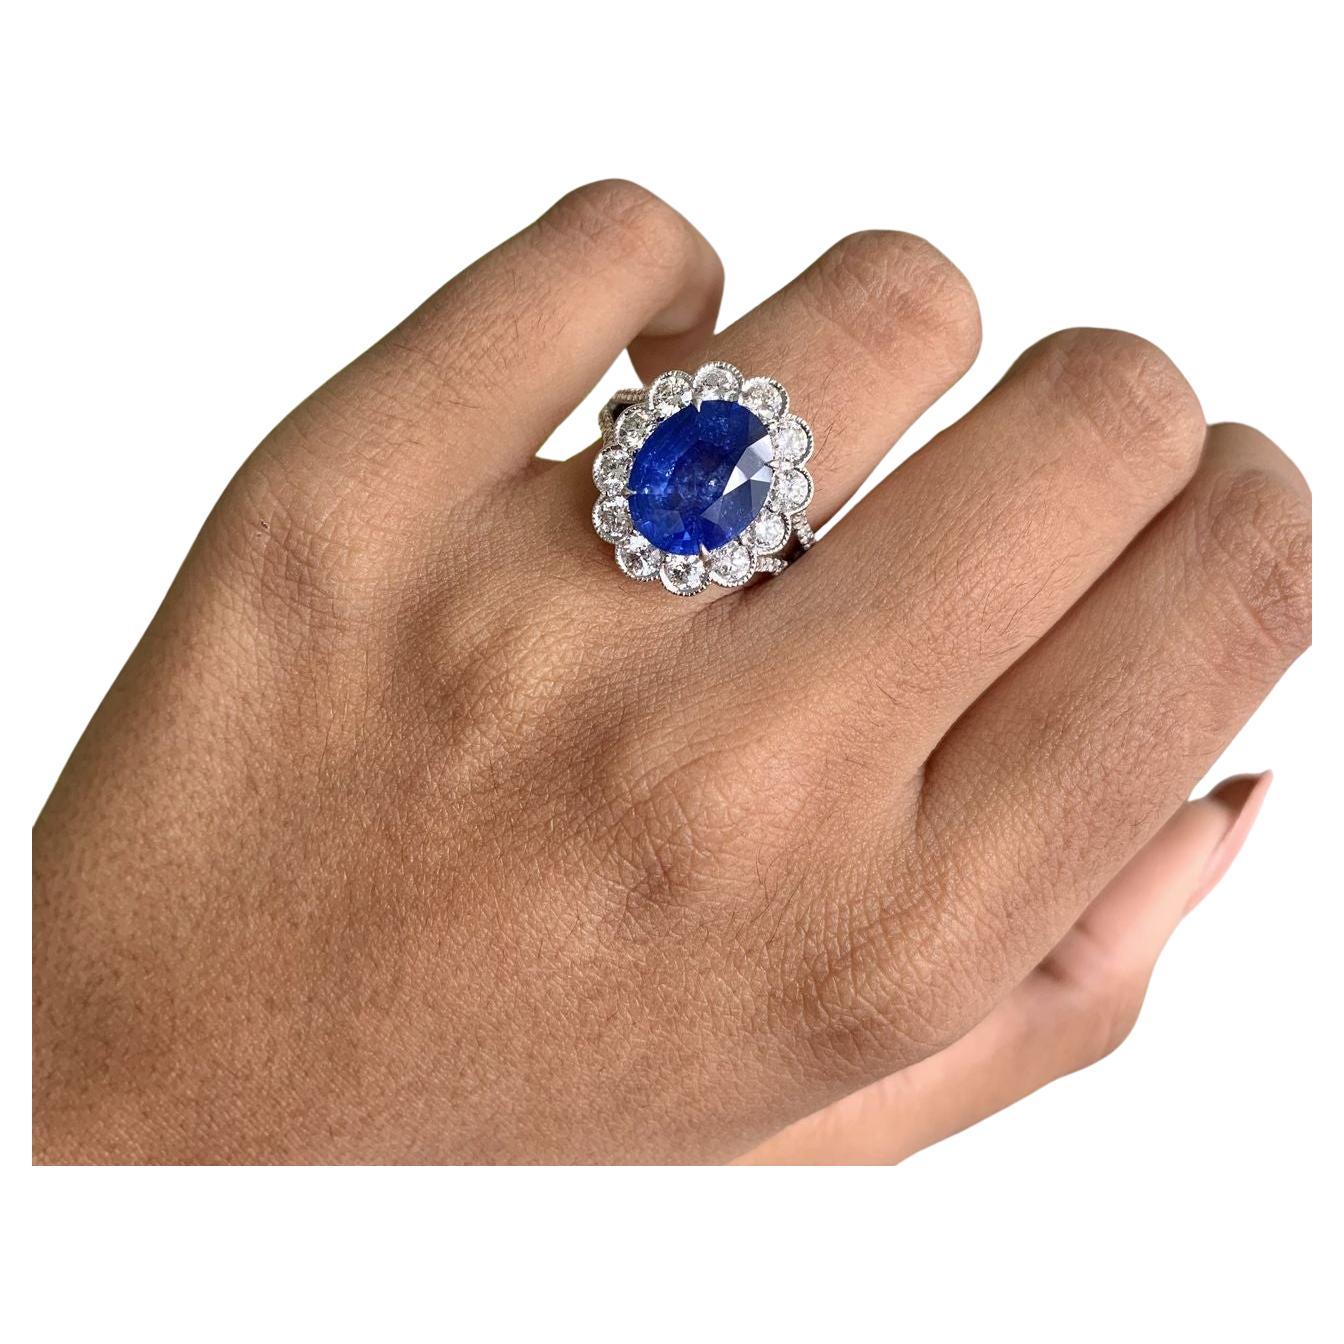 Blue Sapphire & Diamond Ring, a symbol of timeless beauty and impeccable craftsmanship.

Cut to close-up shots of the ring, highlighting the brilliance of the oval-shaped 4.32 carat Blue Sapphire, gleaming in its royal blue hue.

At the heart of